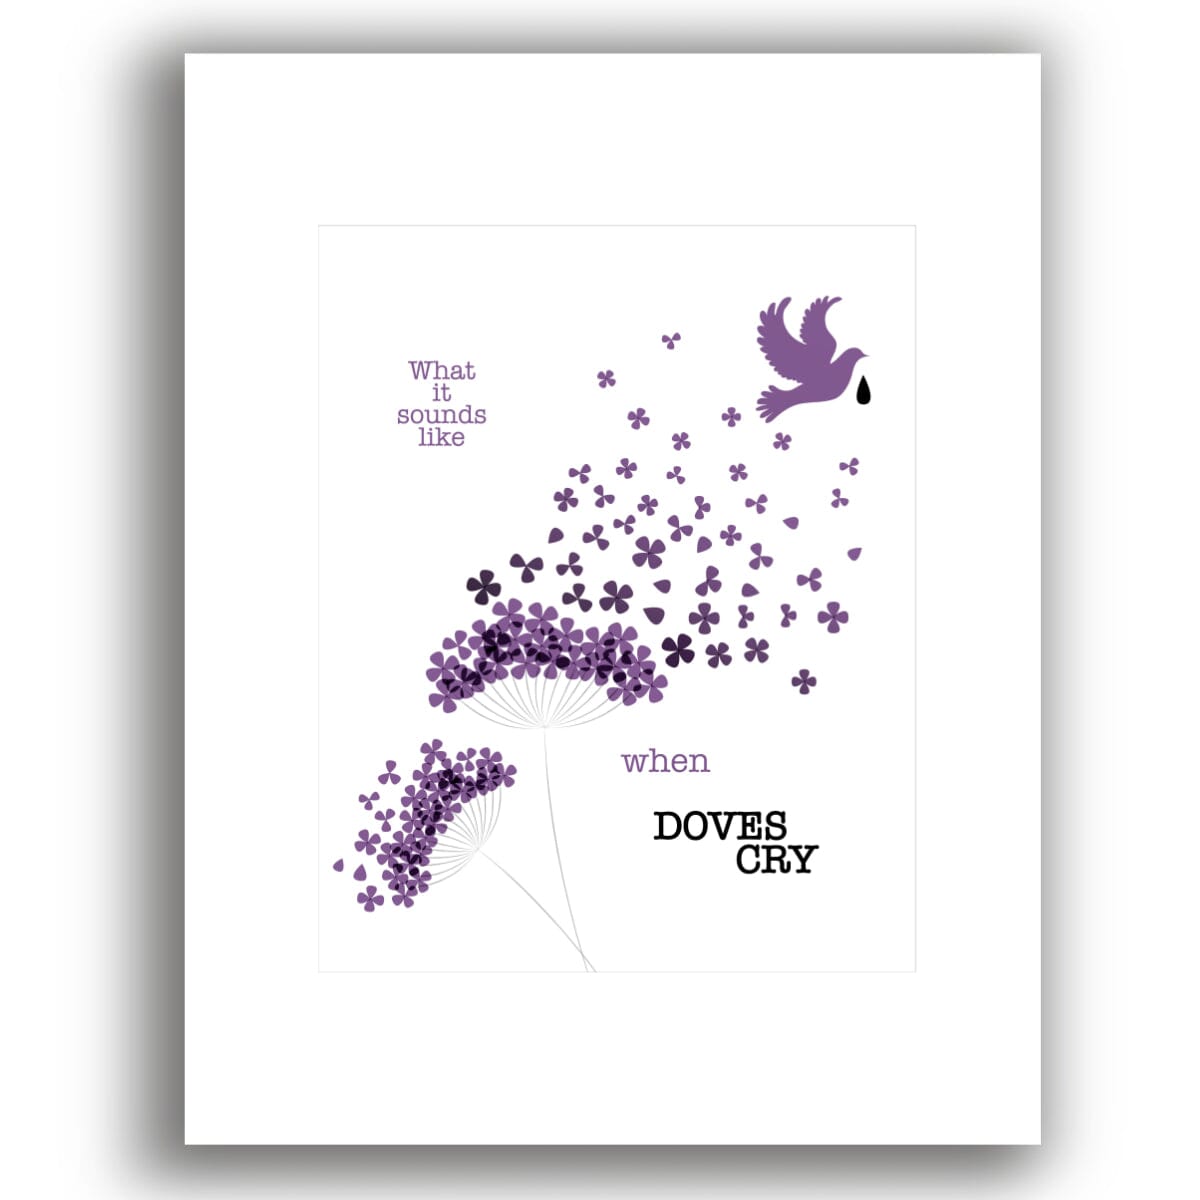 When Doves Cry by Prince - Song Lyrics Wall Art Print Poster Song Lyrics Art Song Lyrics Art 8x10 White Matted Print 